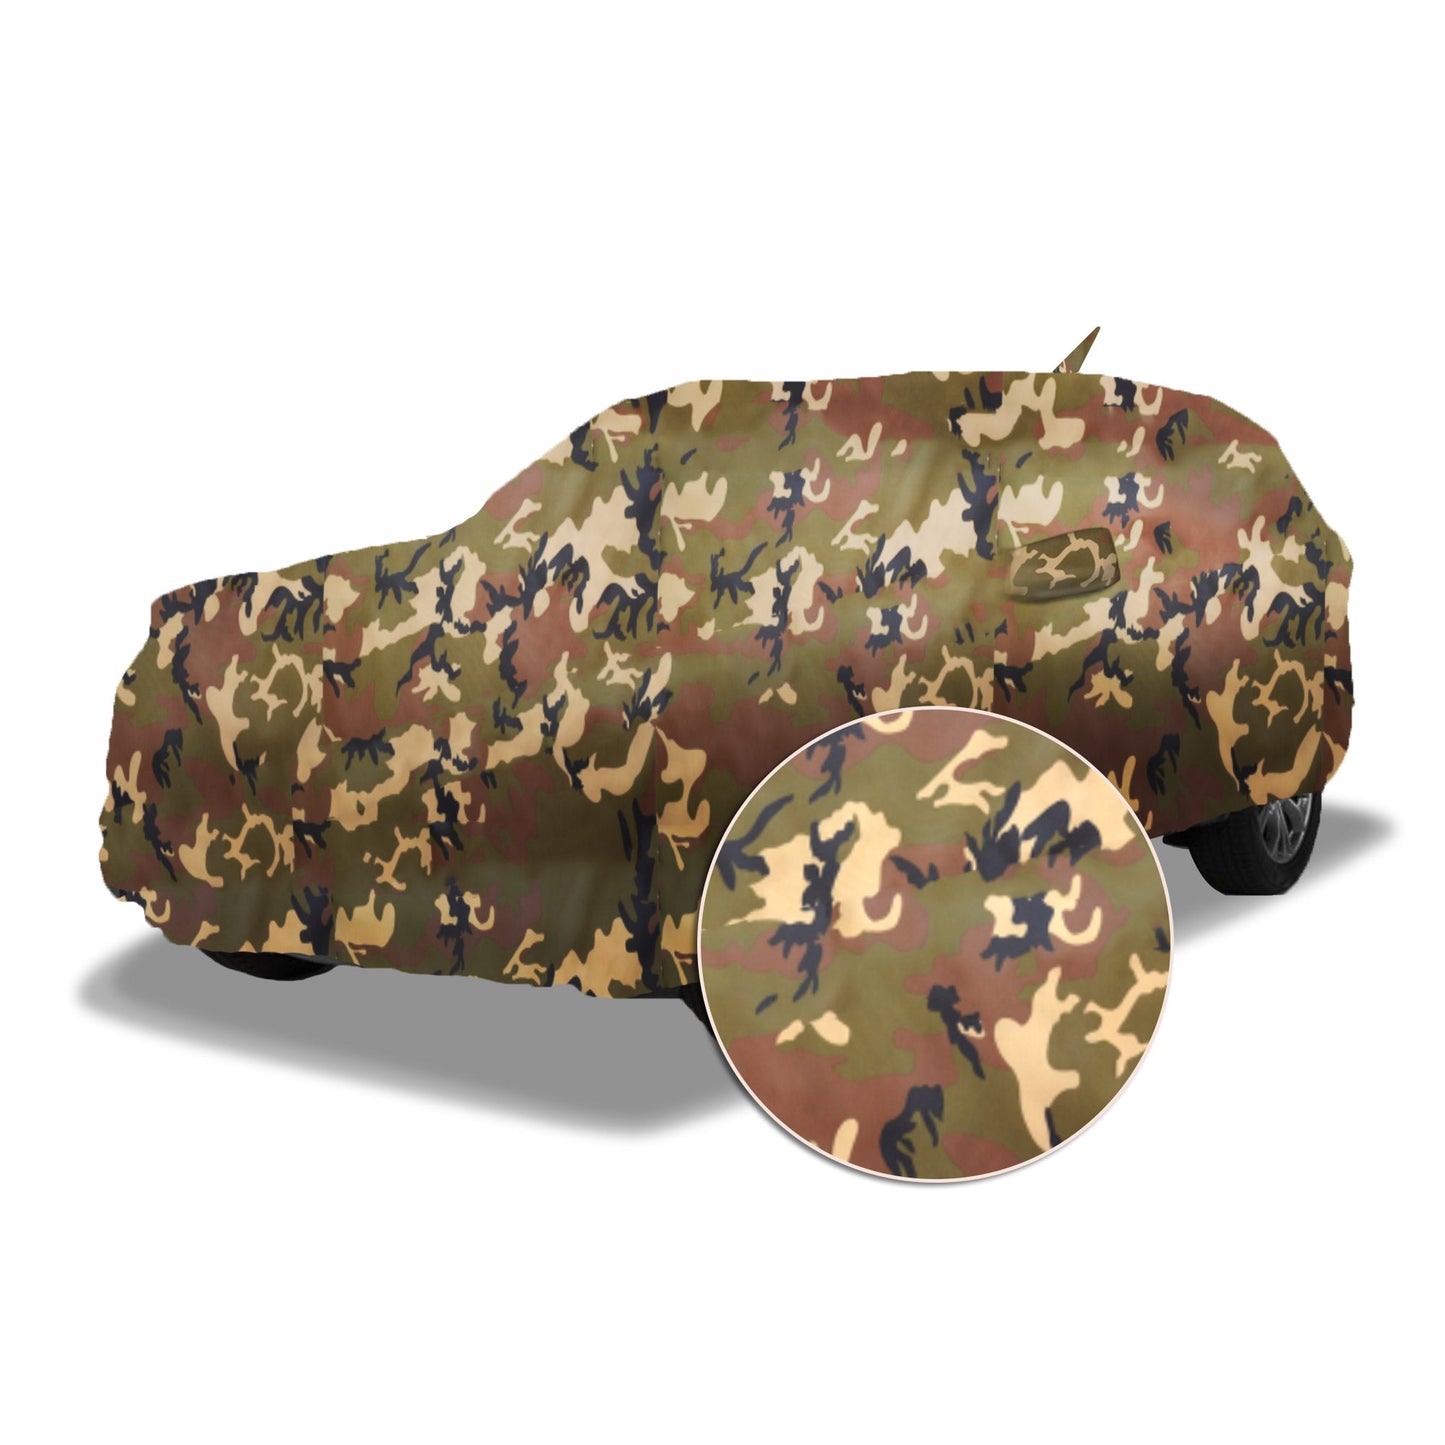 Ascot Hyundai Tucson Car Body Cover Extra Strong & Dust Proof Jungle Military Car Cover with UV Proof & Water-Resistant Coating